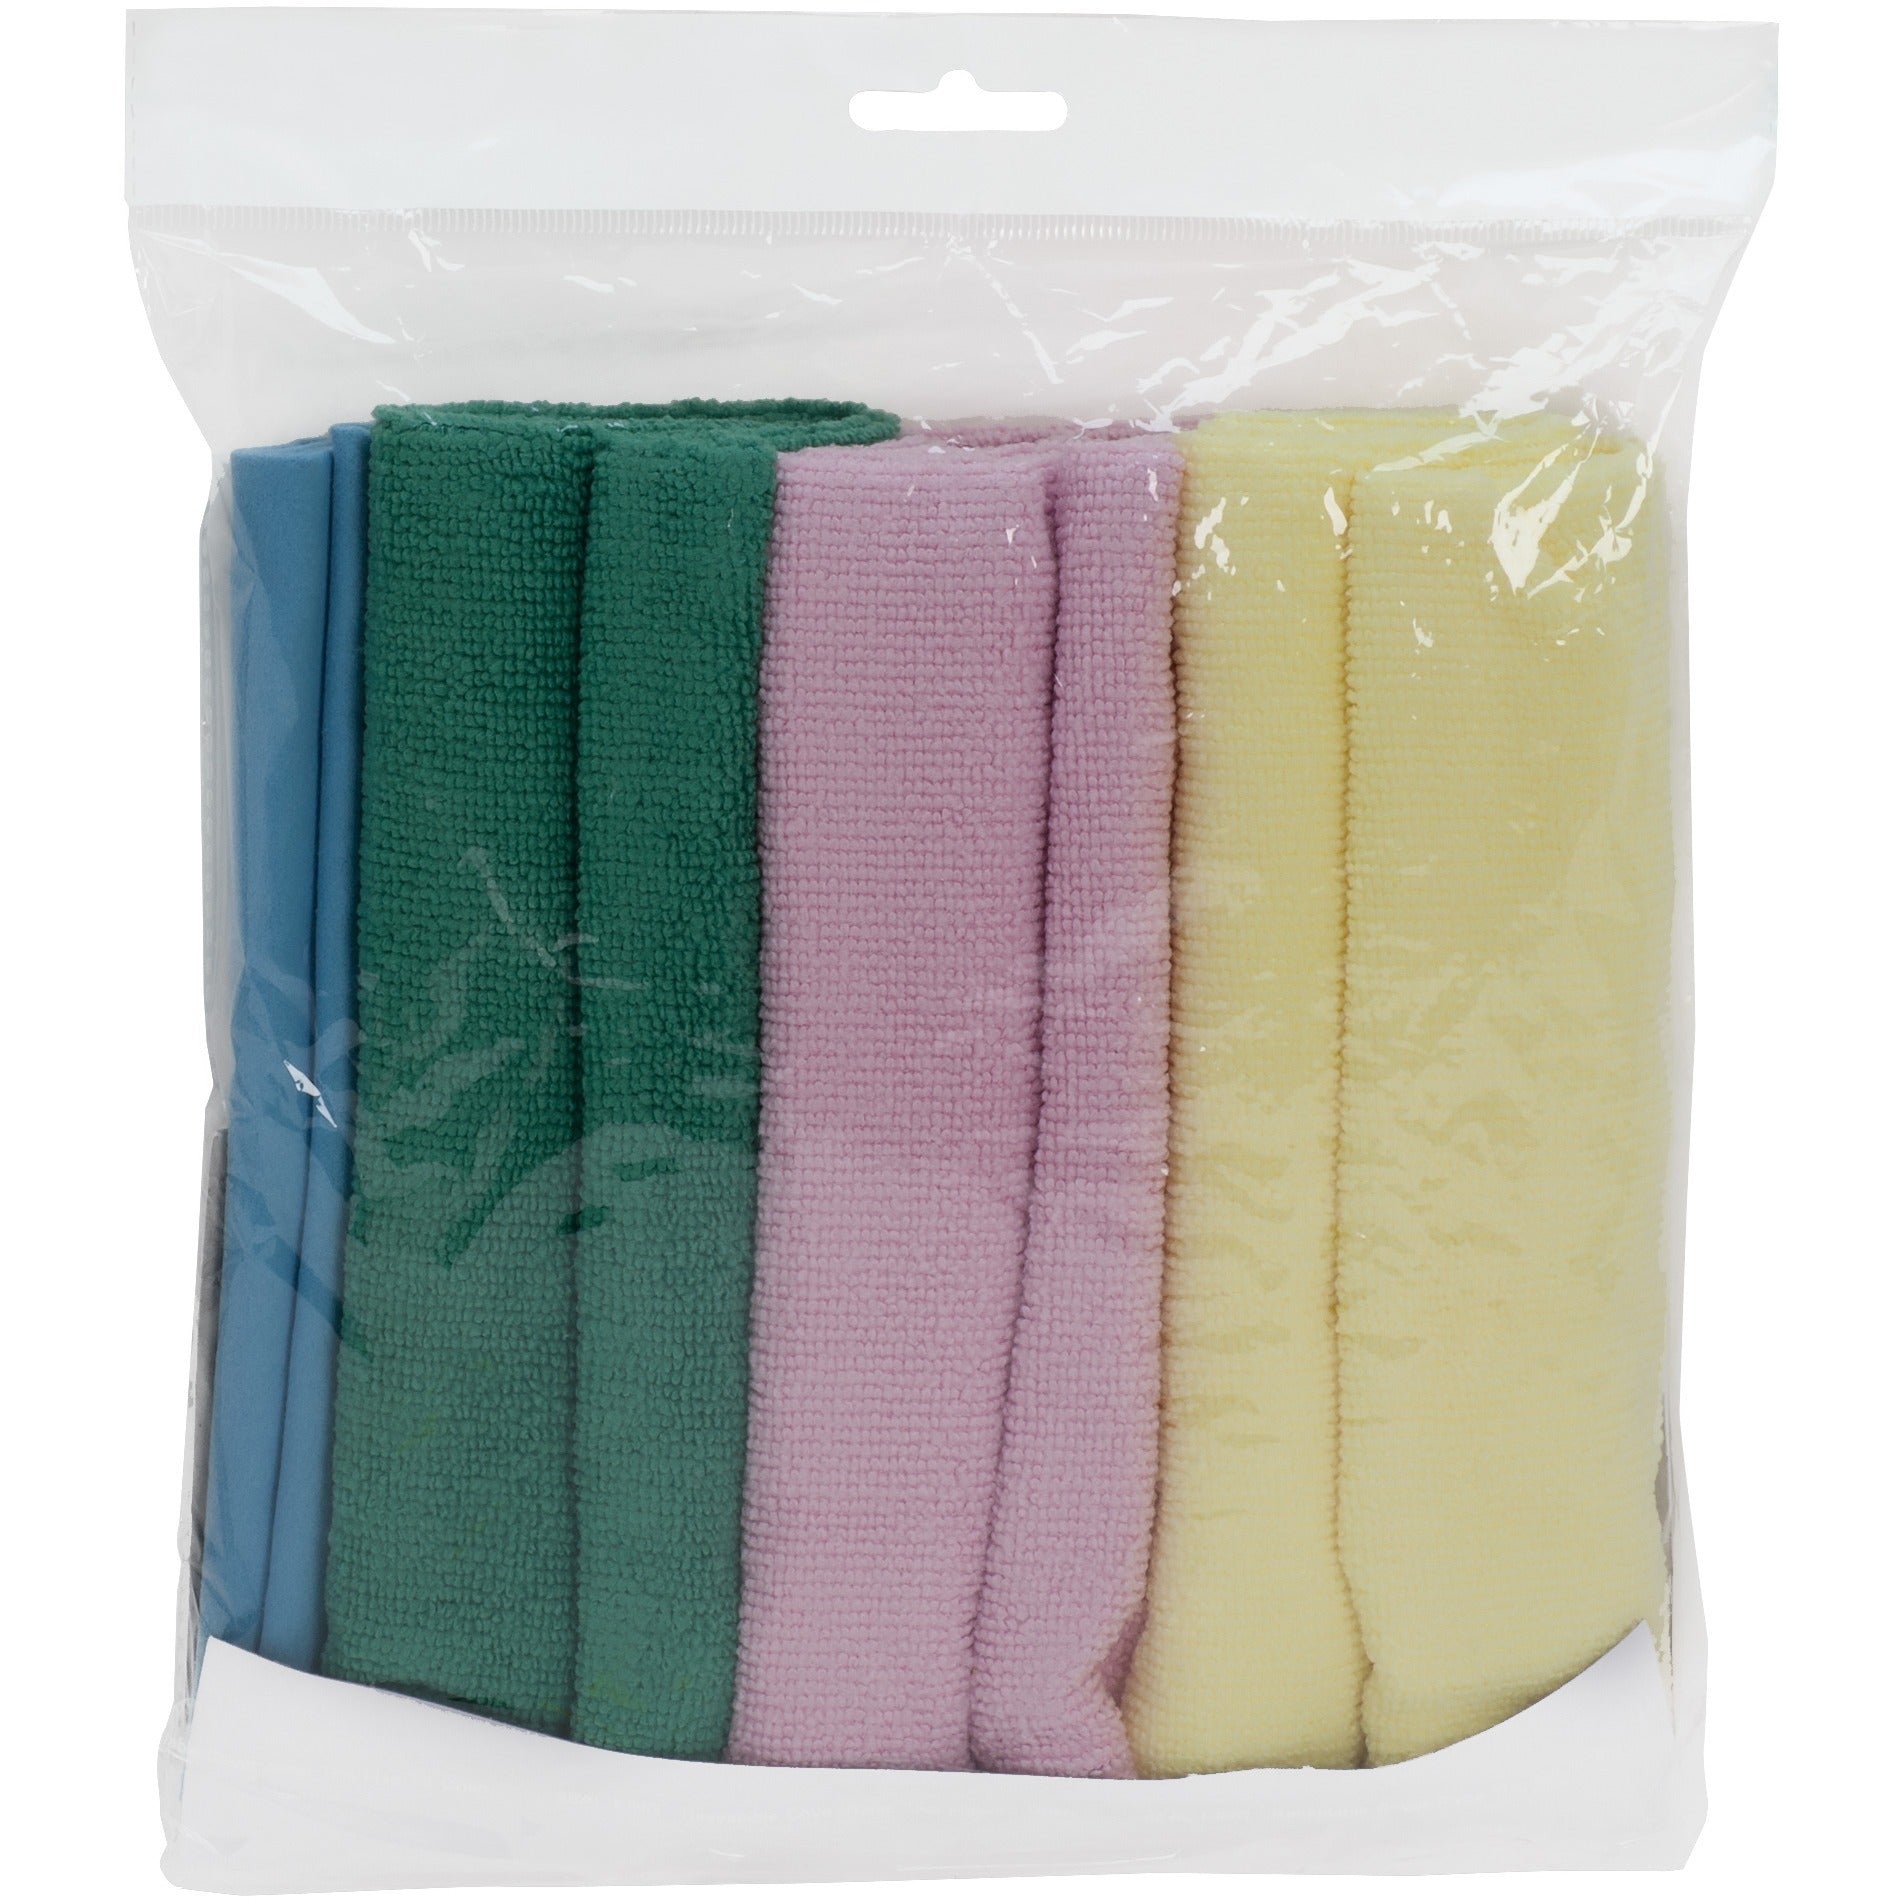 Genuine Joe Color-coded Microfiber Cleaning Cloths - 16" x 16" - Assorted - MicroFiber - Lint-free - For Multipurpose - 4 / Pack - 